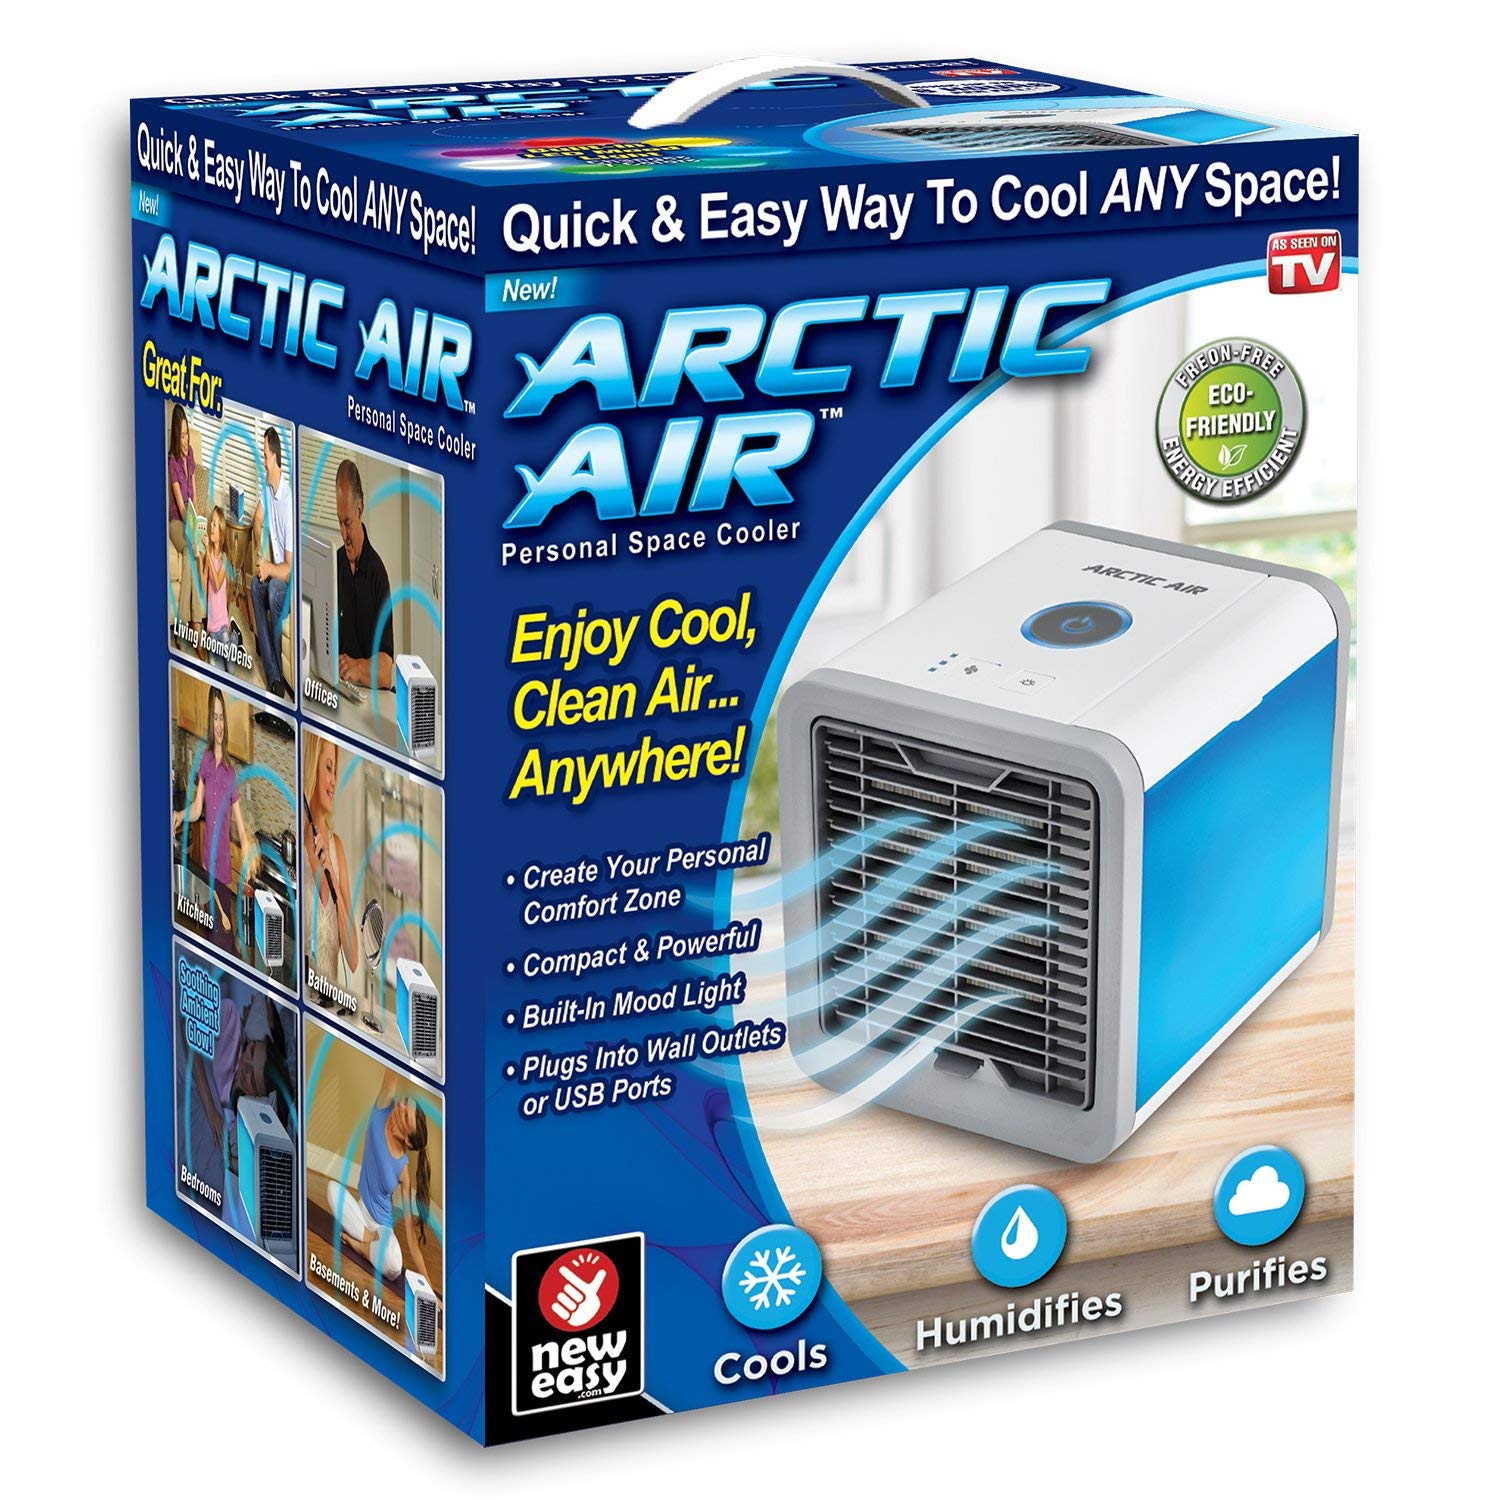 Ontel AA-MC4 Arctic Air Personal Space & Portable Cooler | The Quick & Easy Way to Cool Any Space, As Seen On TV